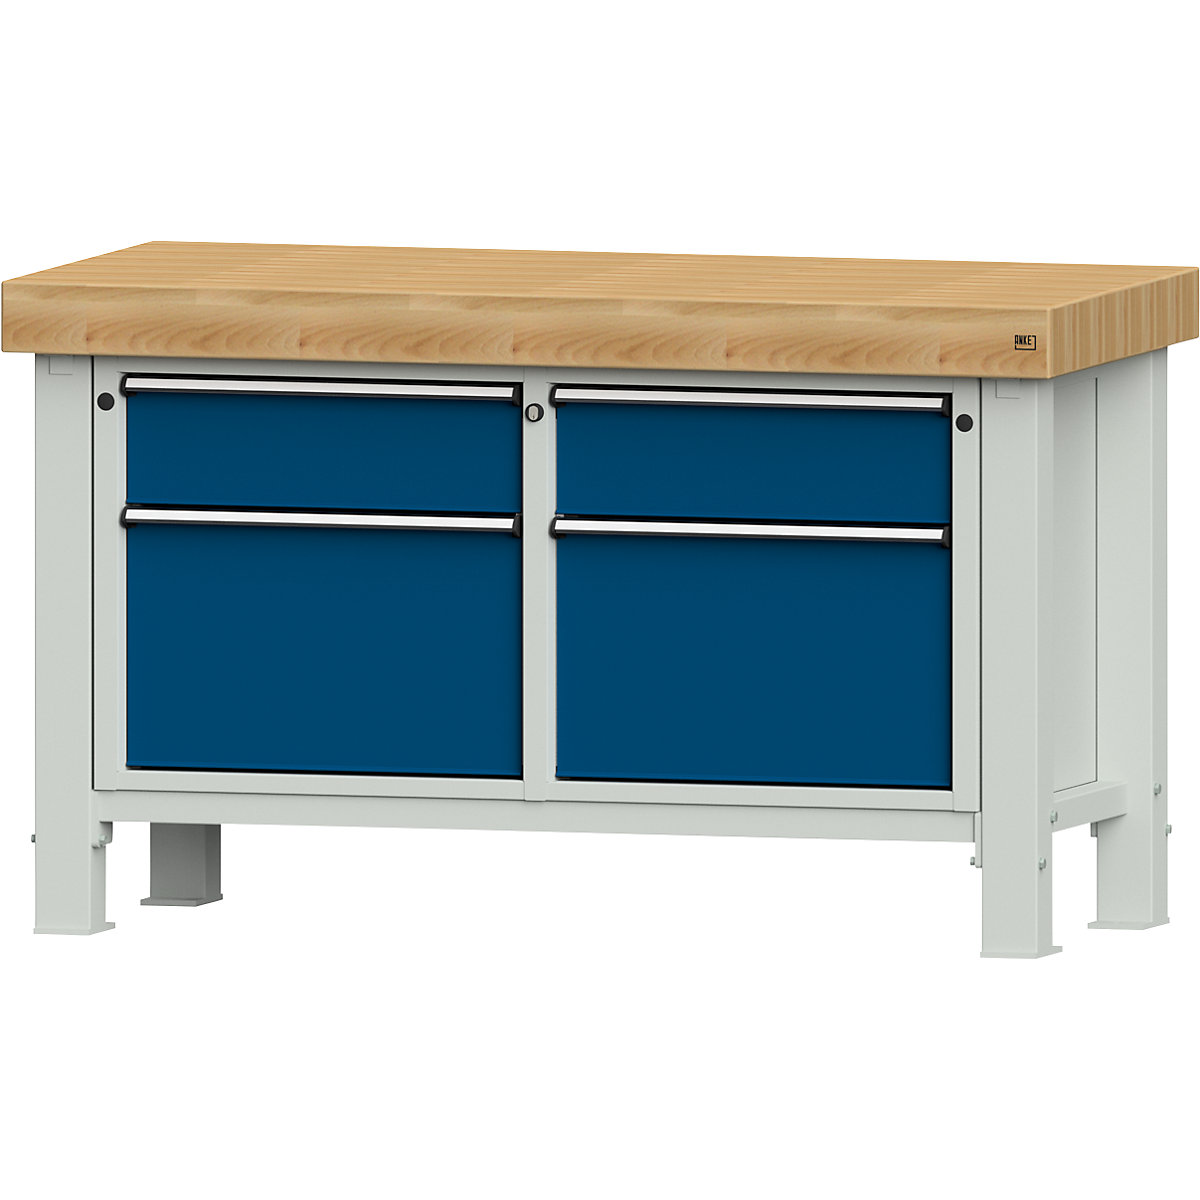 Heavy duty workbench – ANKE, worktop width 1500 mm, with 2 drawers and 2 hinged doors, worktop thickness 100 mm-1